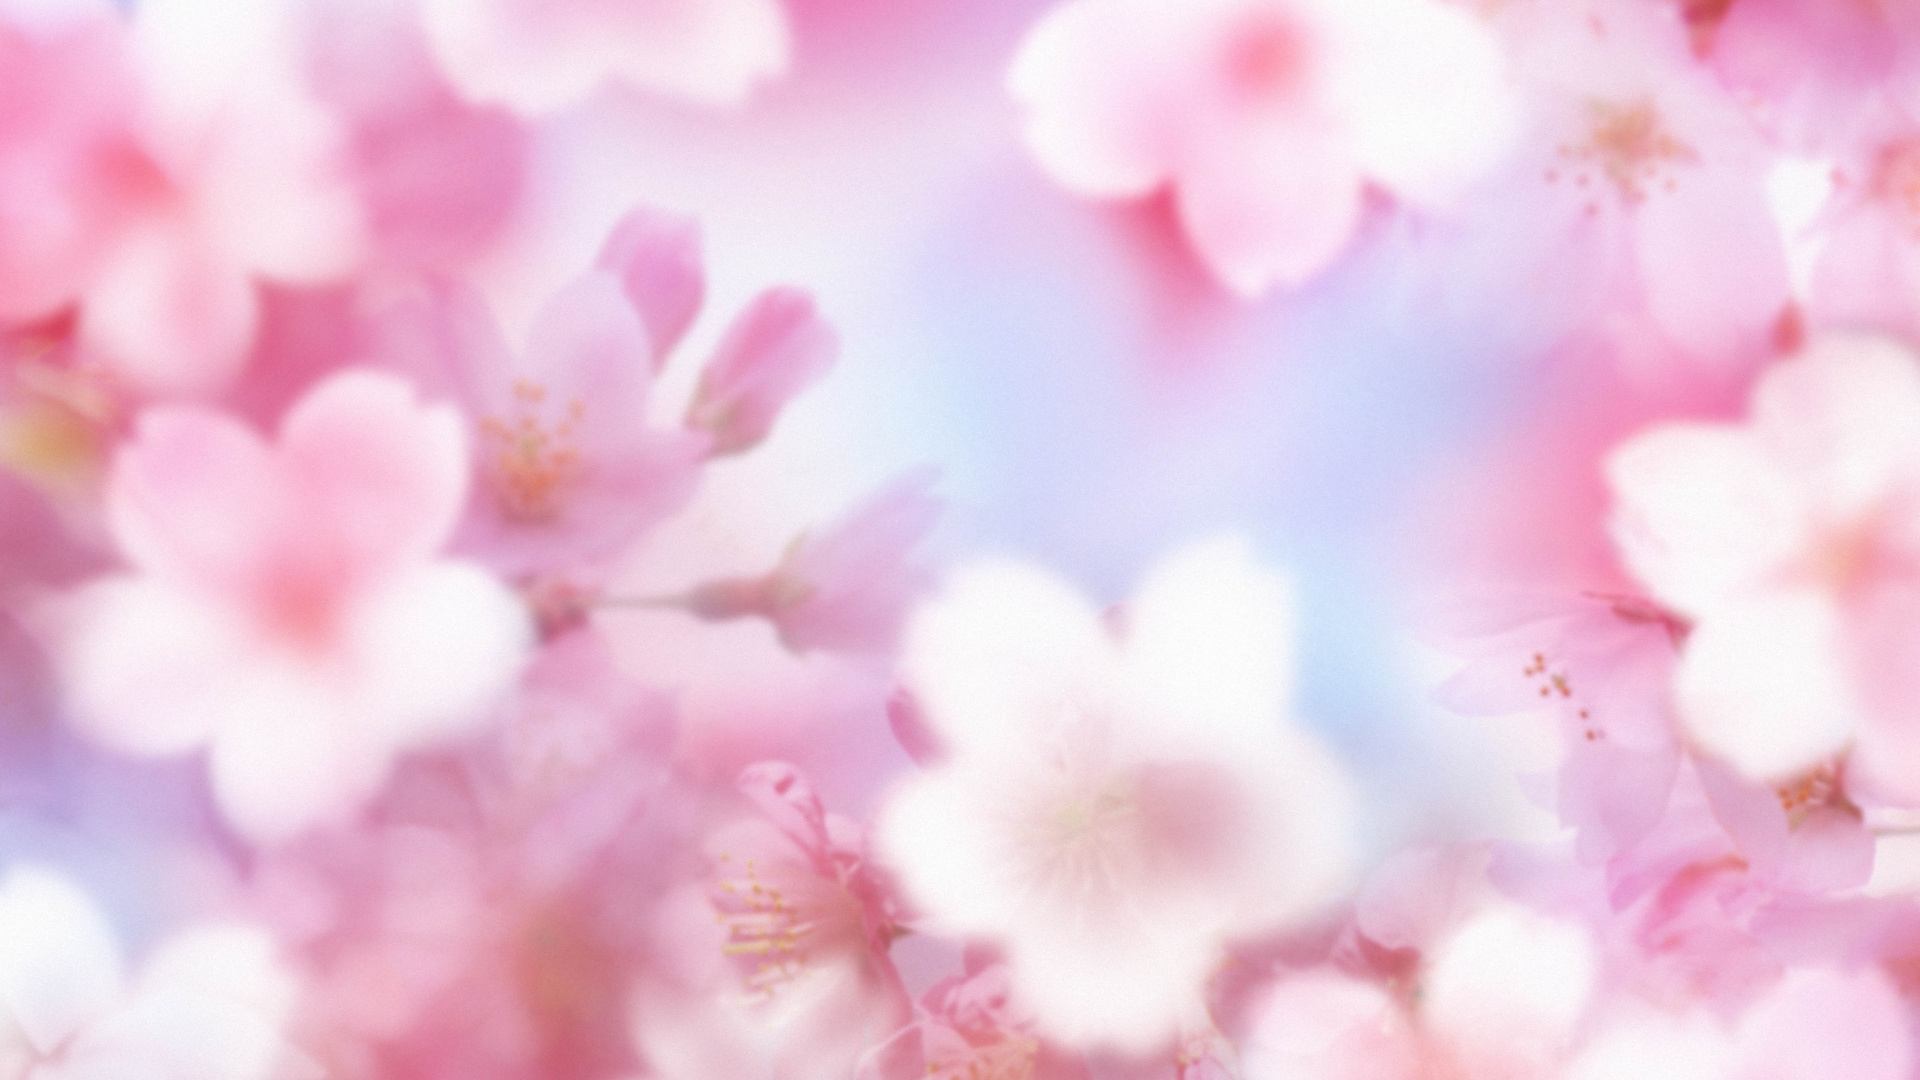 Pink Cherry Blossom Under Blue Sky During Daytime. Wallpaper in 1920x1080 Resolution